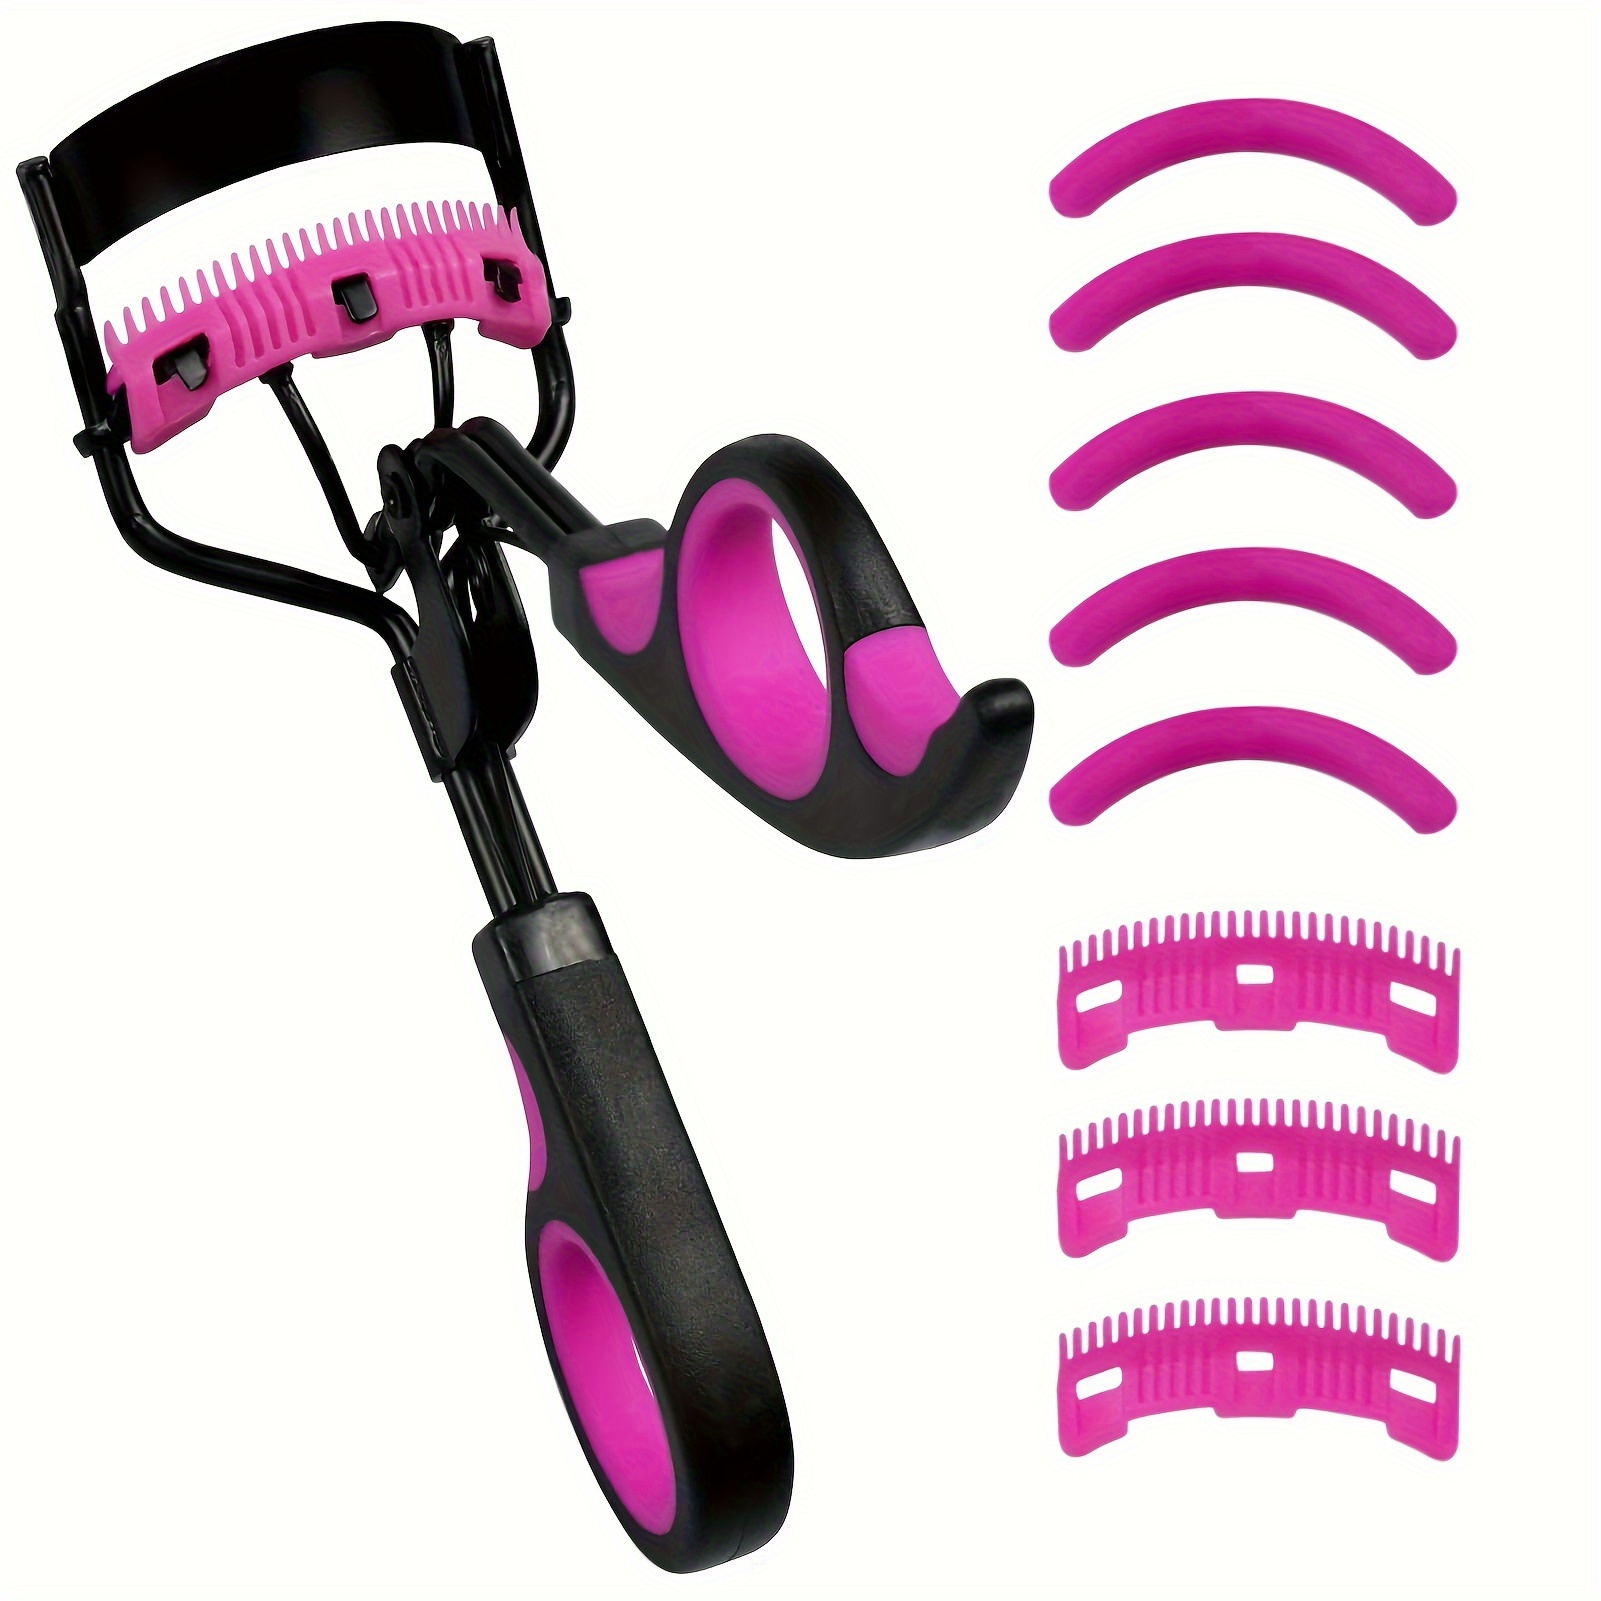 

Eyelash Curlers With Comb Lash Curler With 5 Replacement Refills, 3 Combs, 10 Seconds And Lifted Lashes Black And Purple